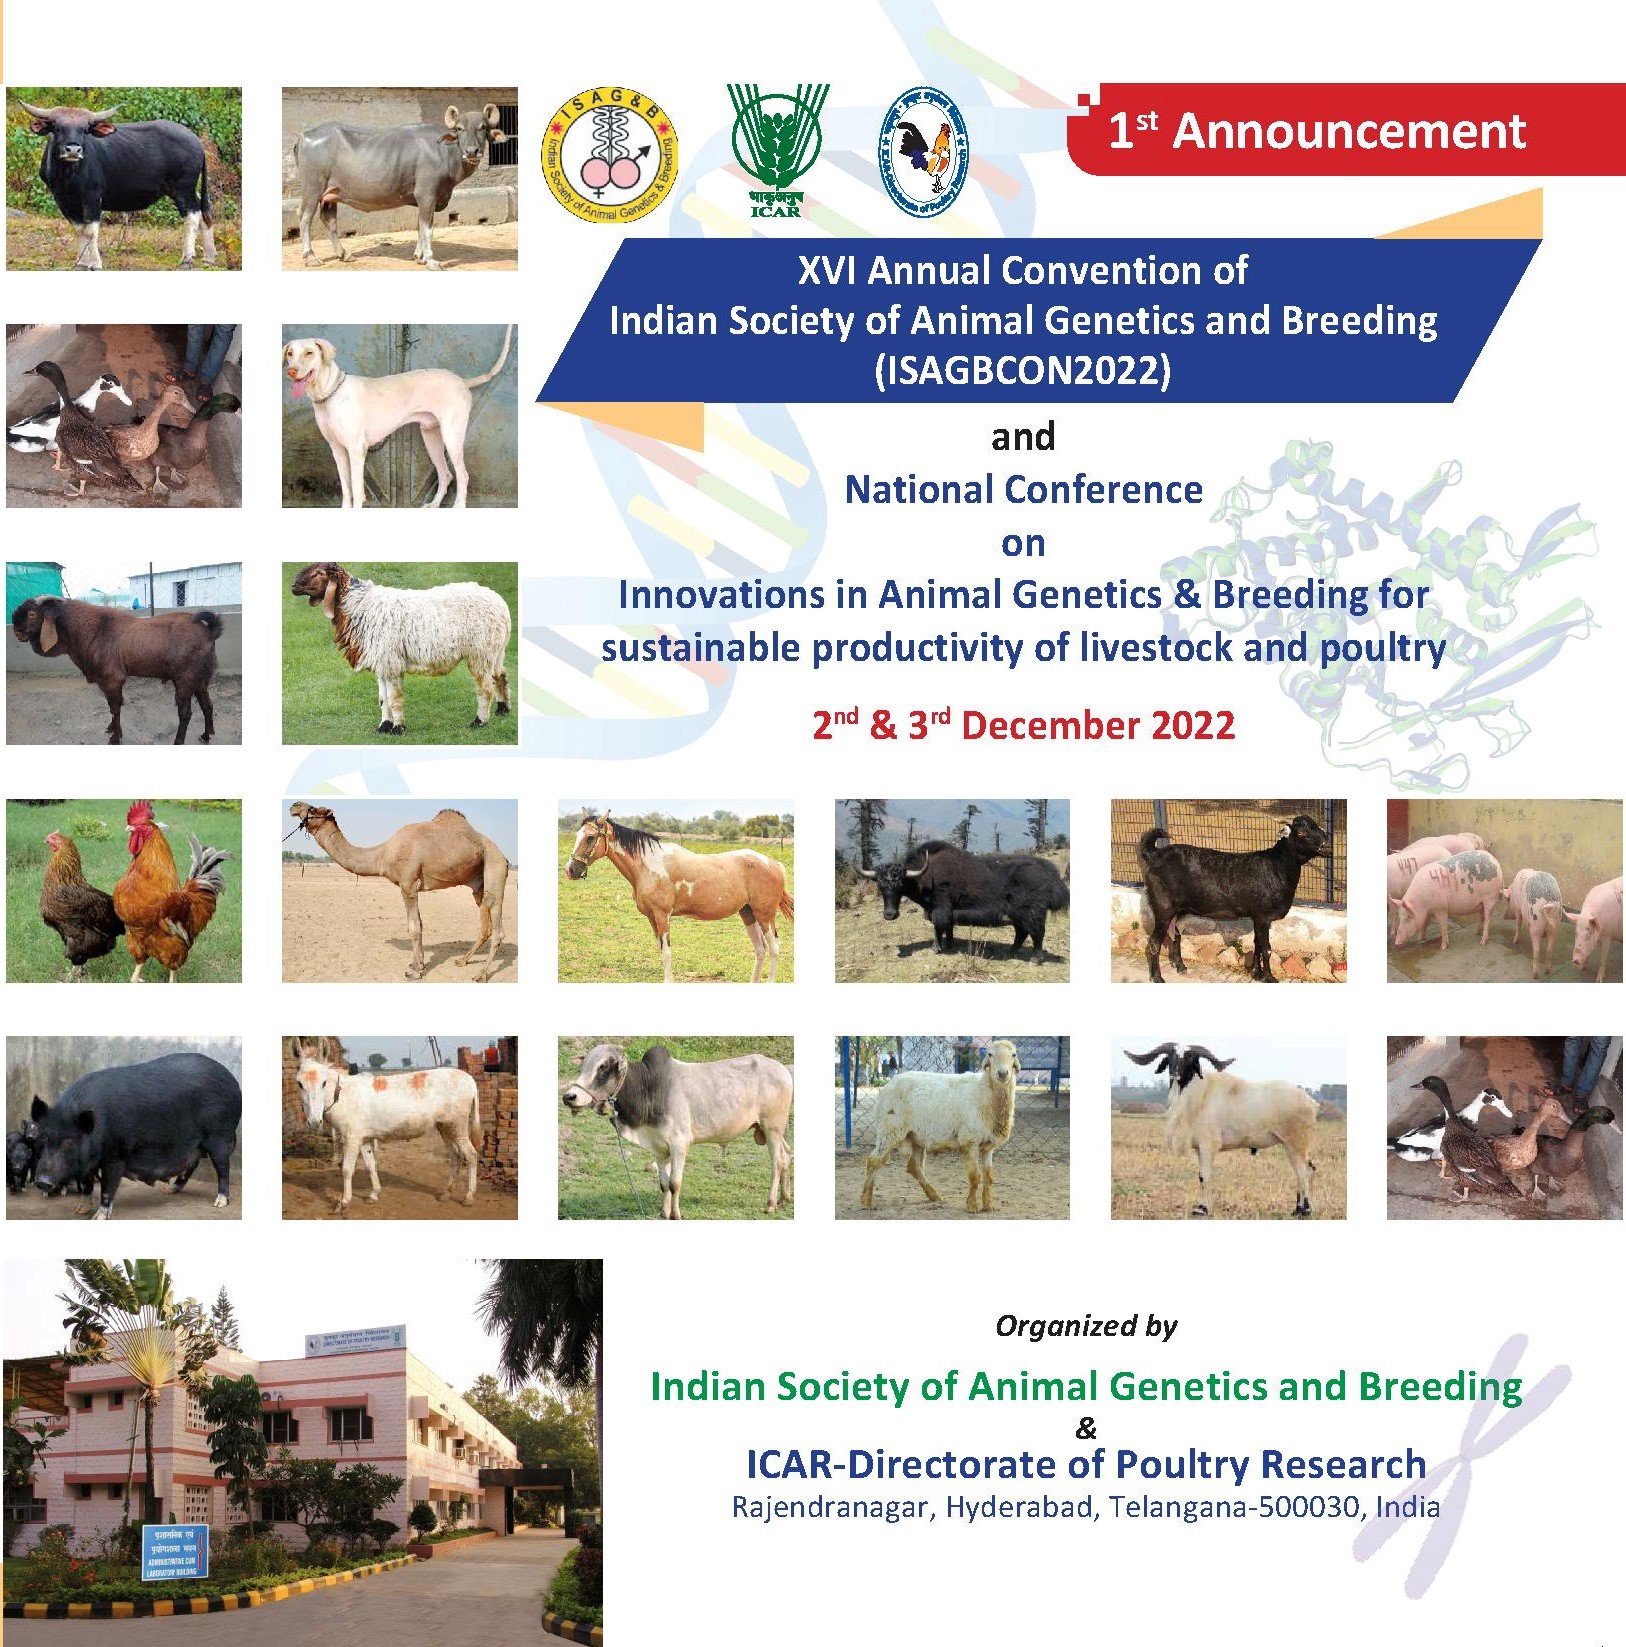 XVI Annual Convention of ISAGB - 1st Announcement